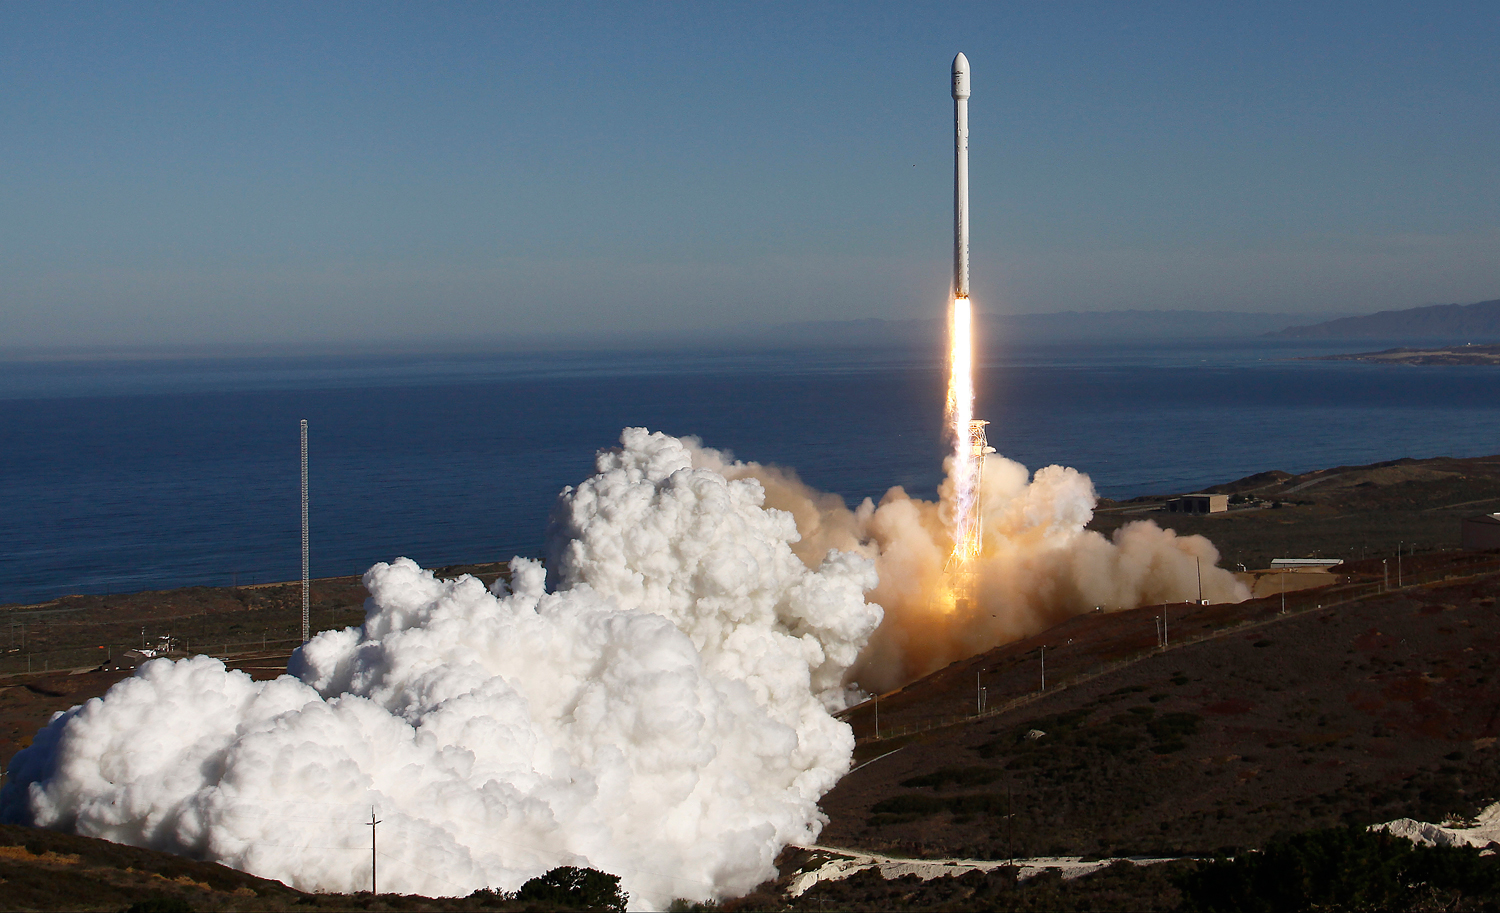 A Falcon 9 rocket carrying a small science satellite for Canada is launched from a newly refurbished launch pad in Vandenberg Air Force Station in California, on Sept. 29, 2013.